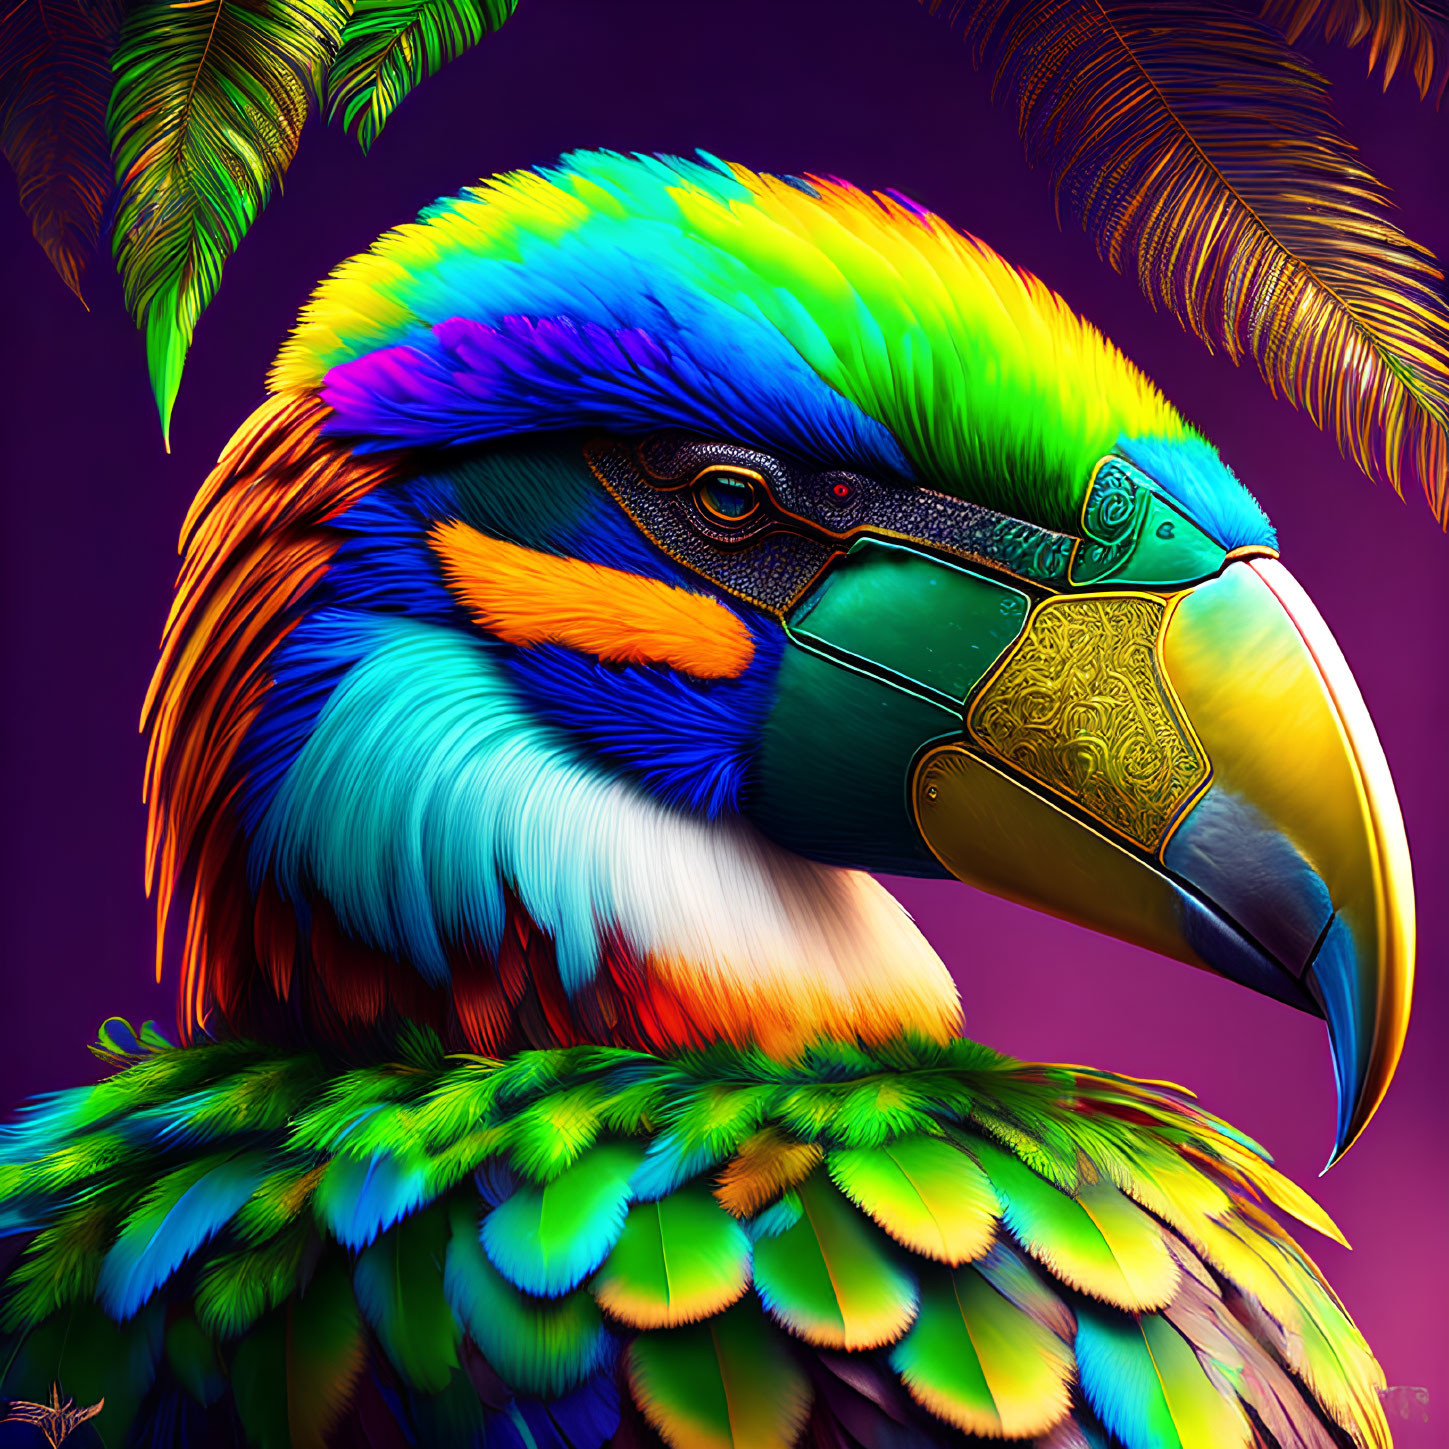 Colorful Toucan Digital Artwork with Rainbow Feathers and Ornate Patterns